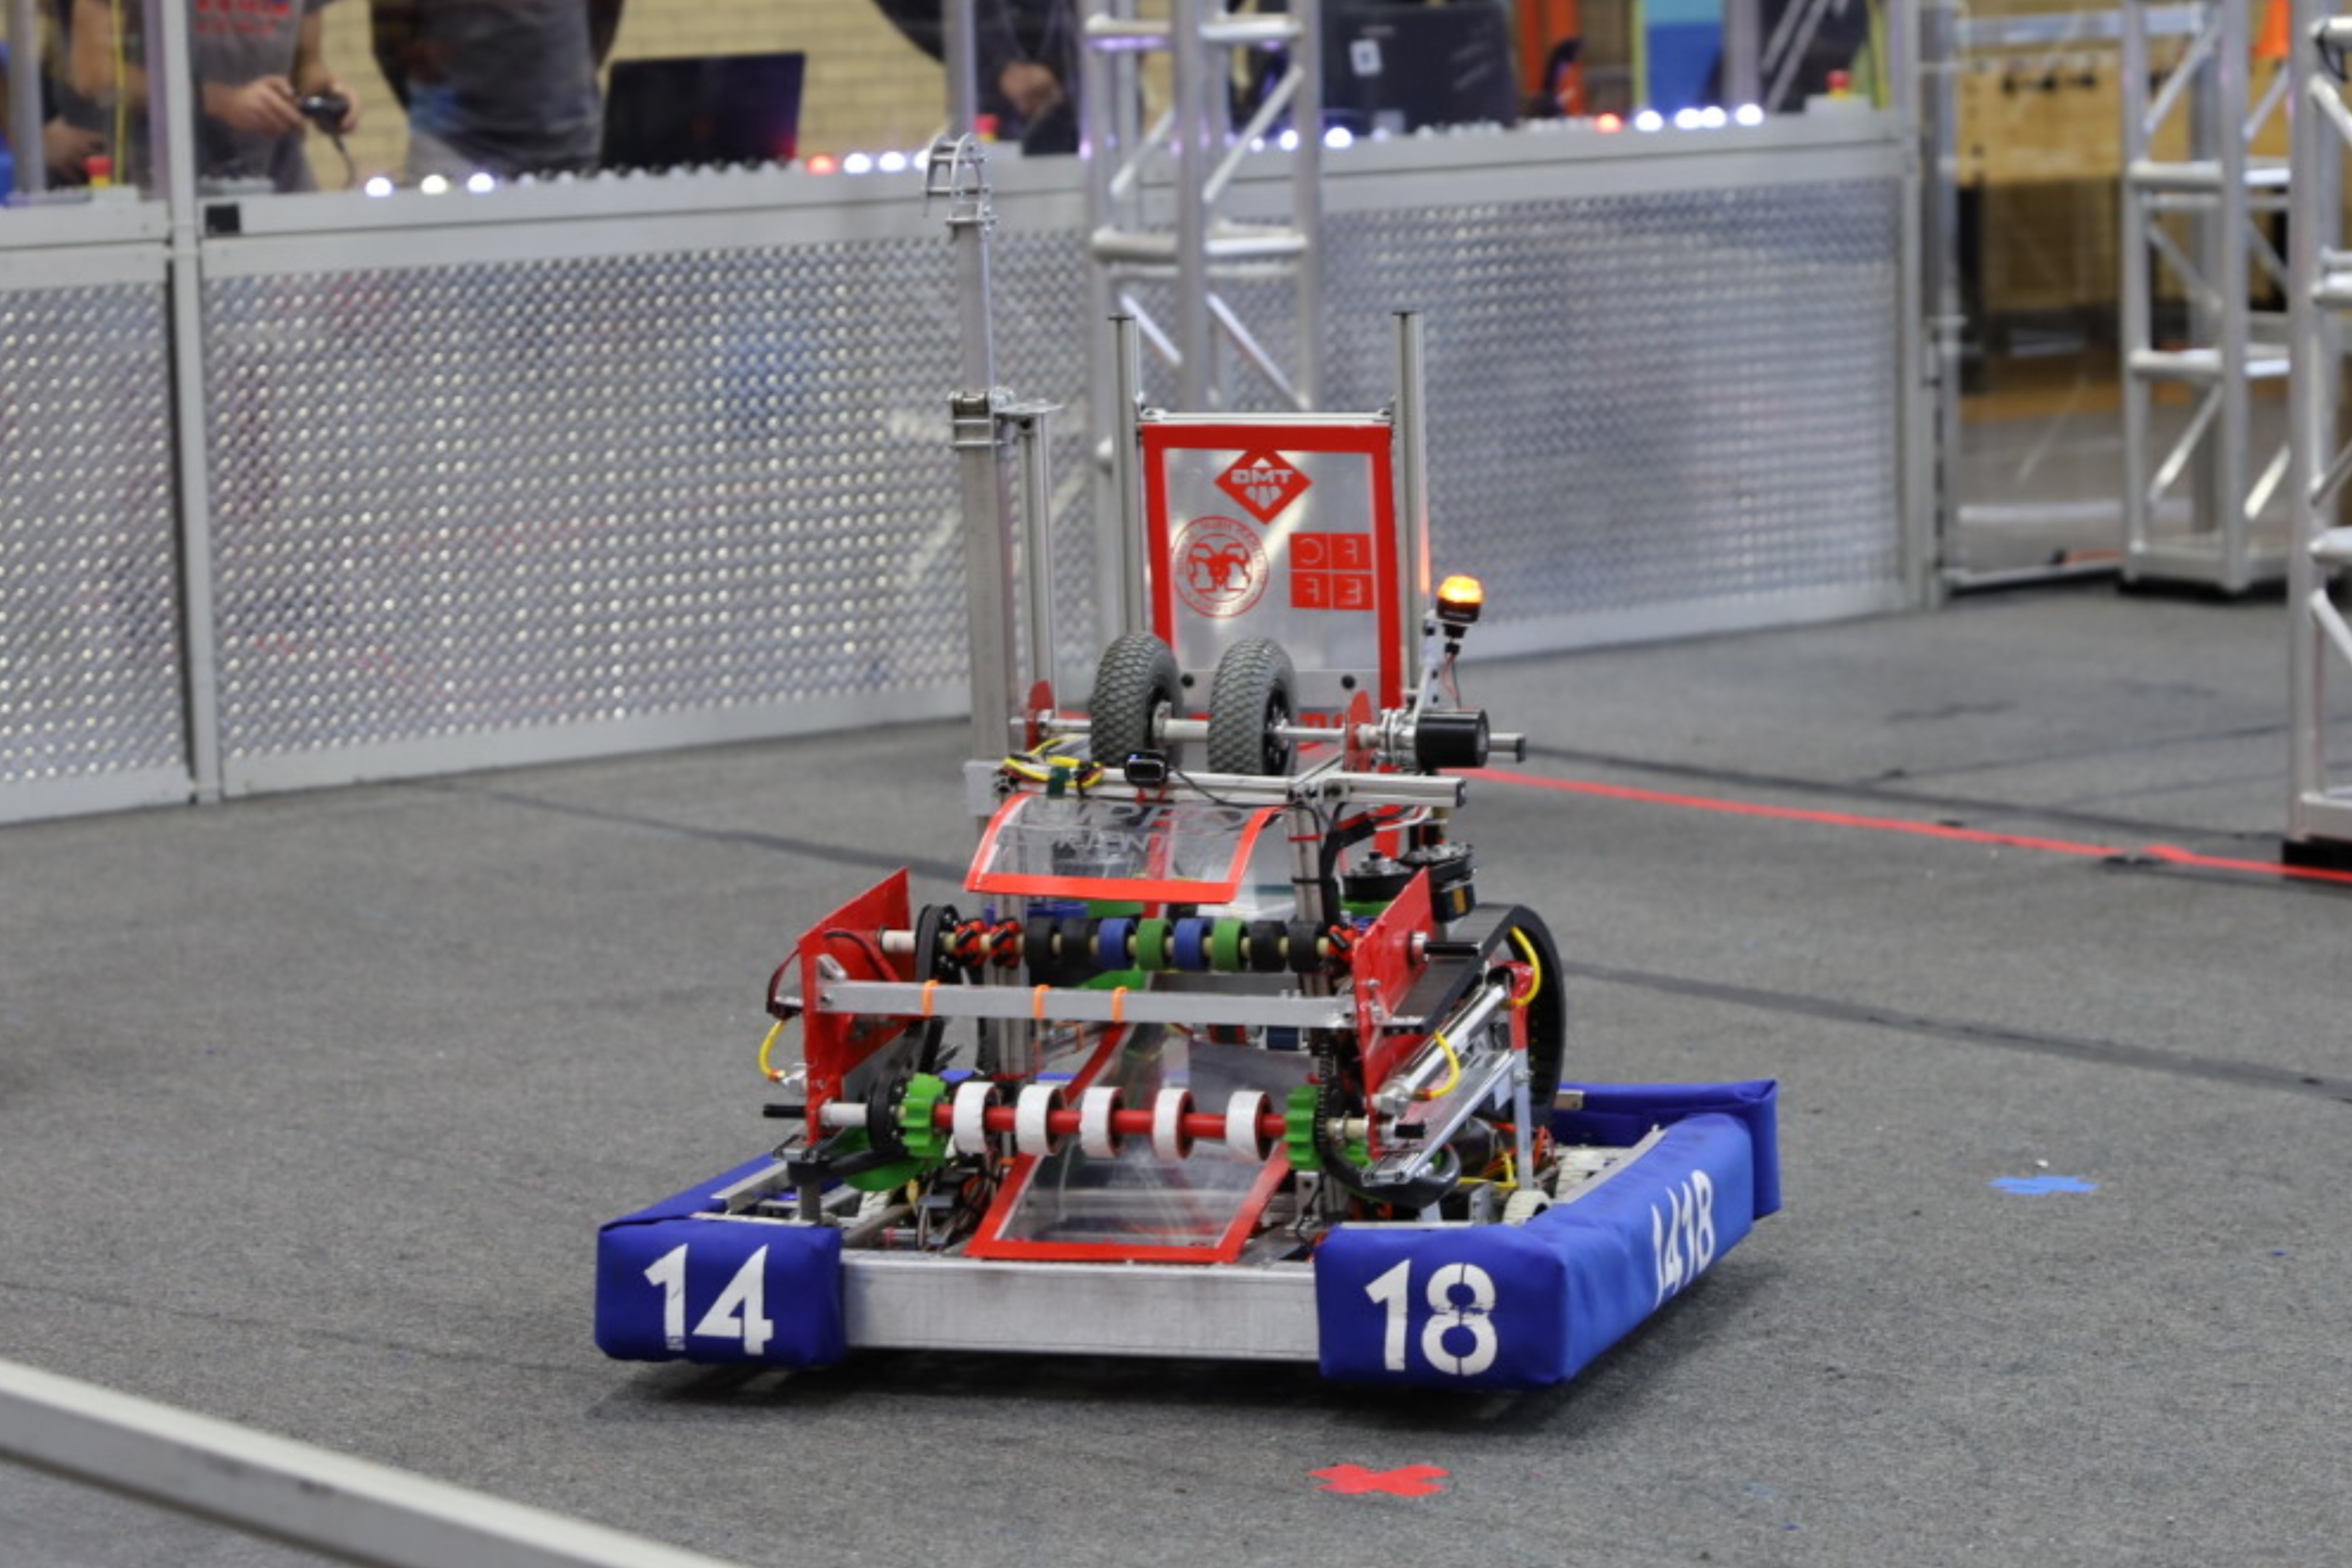 This is our 2022 robot